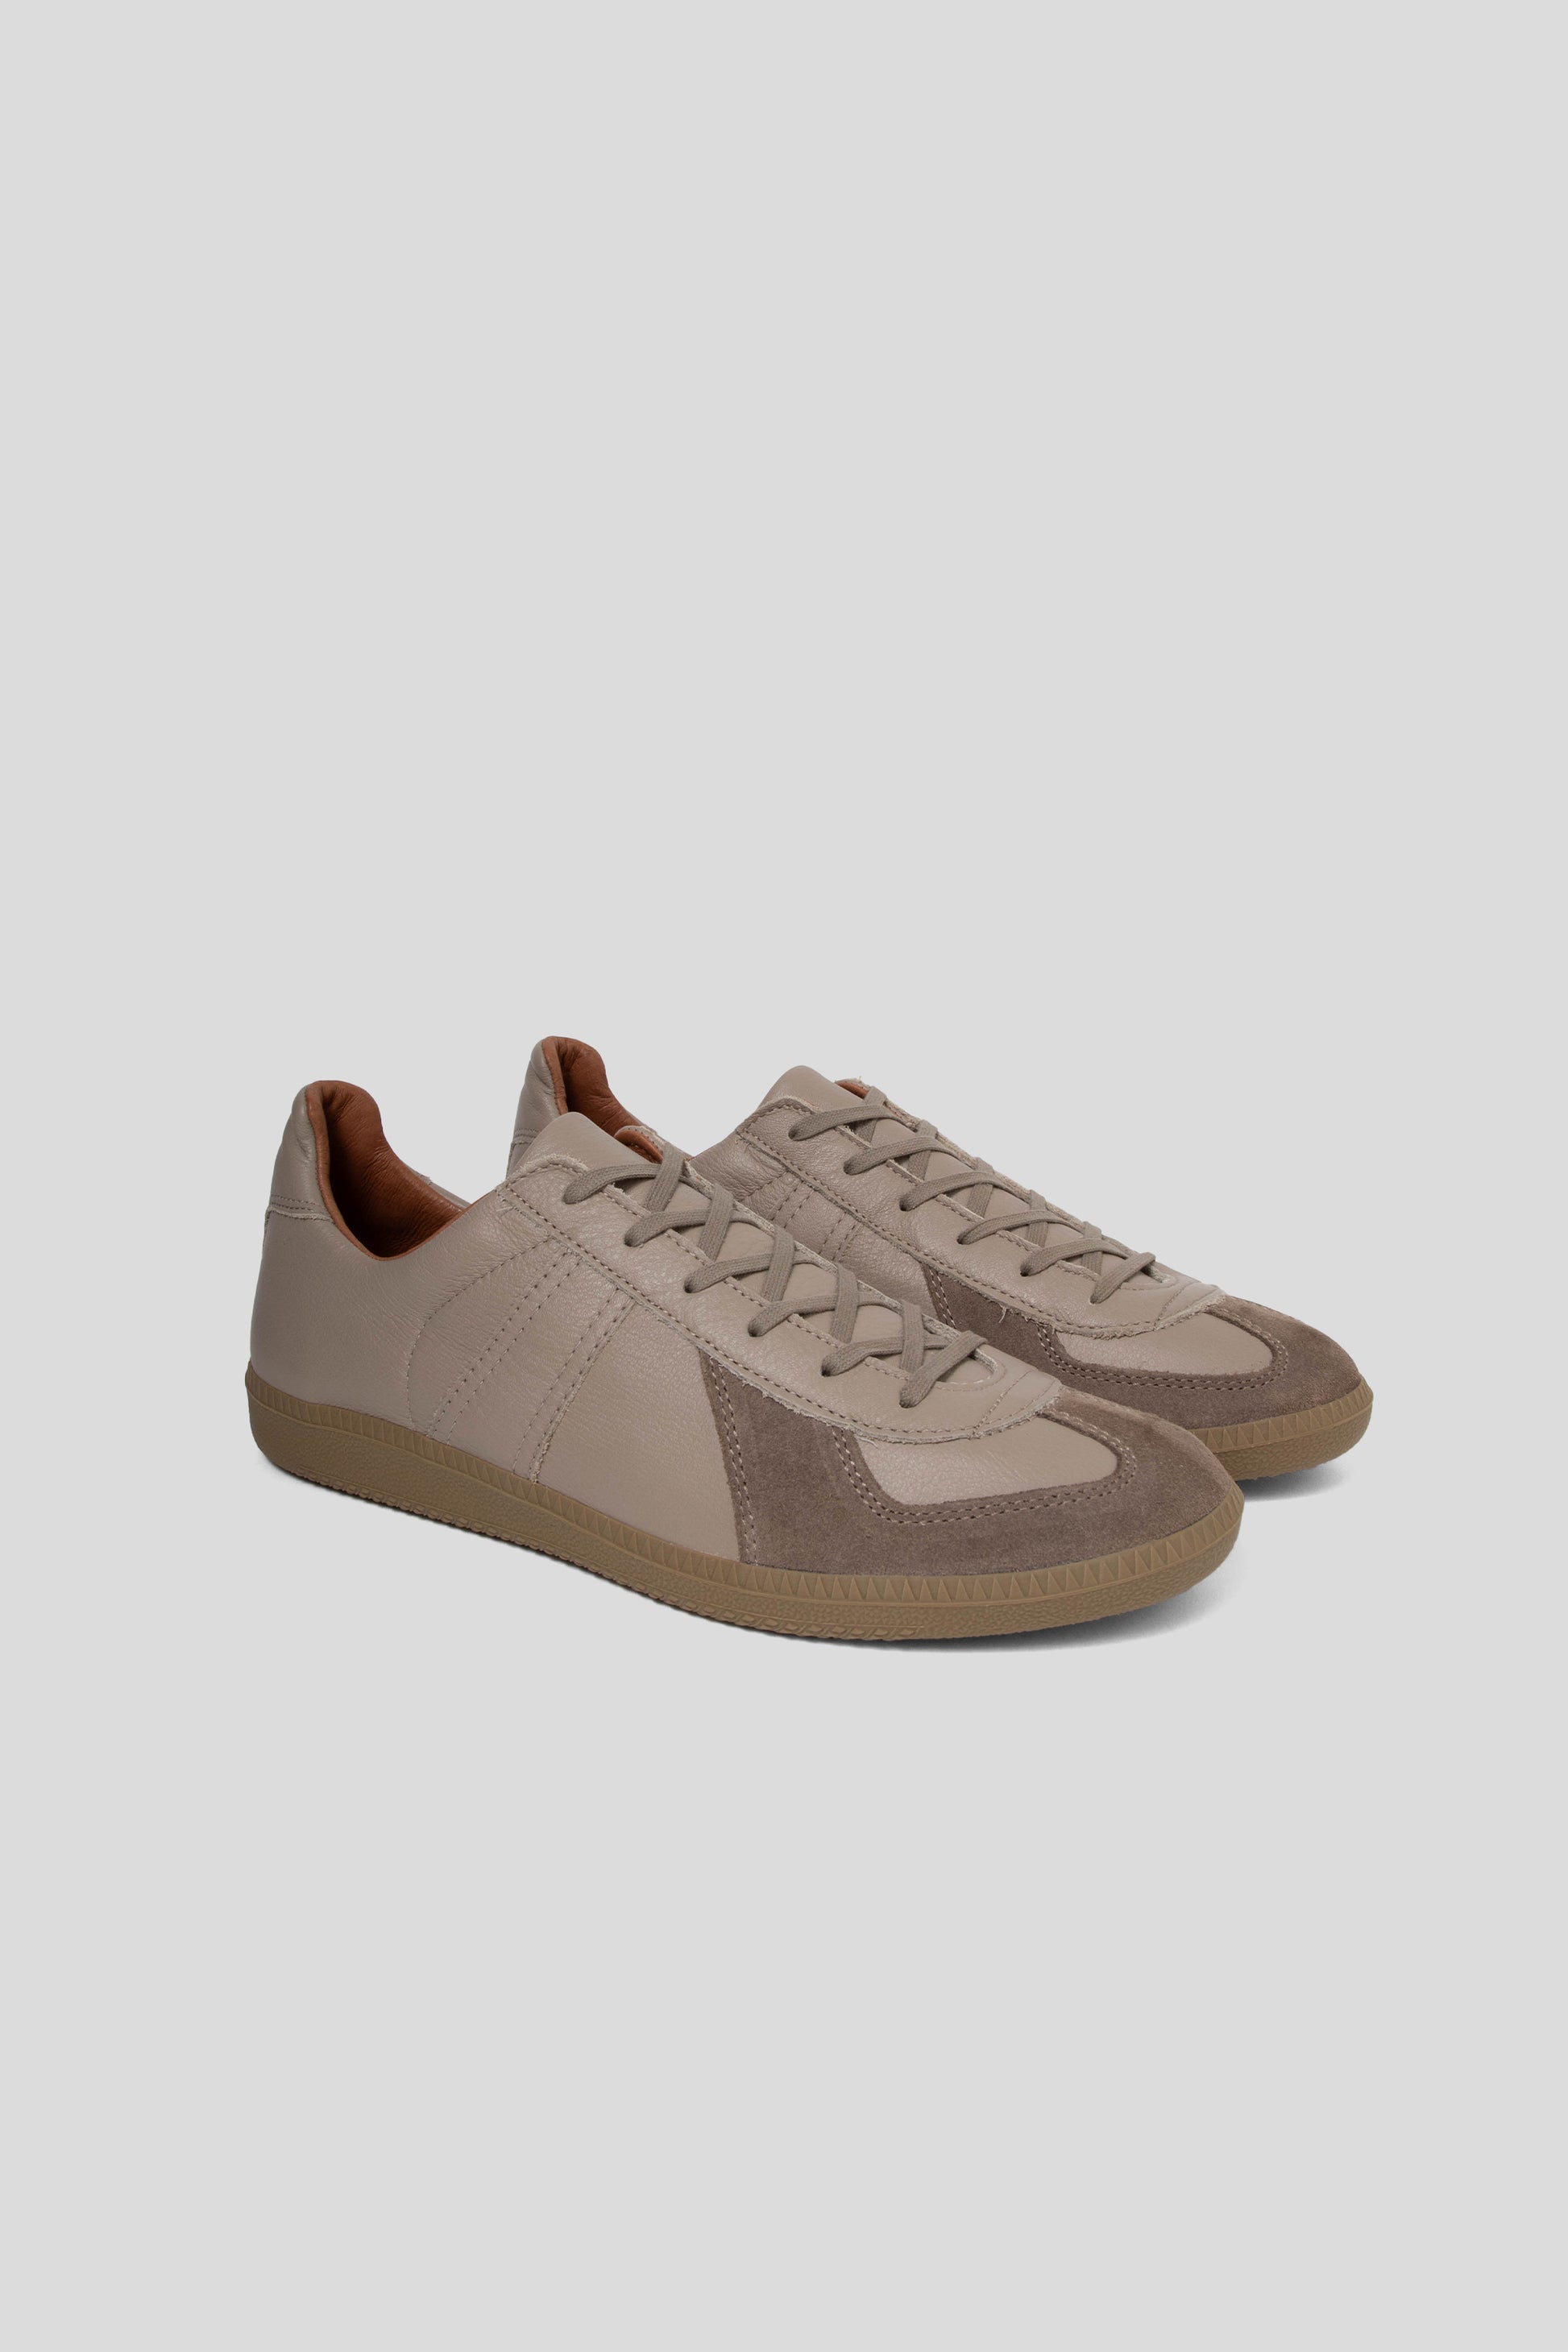 Reproduction of Found Women's German Military Trainer - Beige Khaki